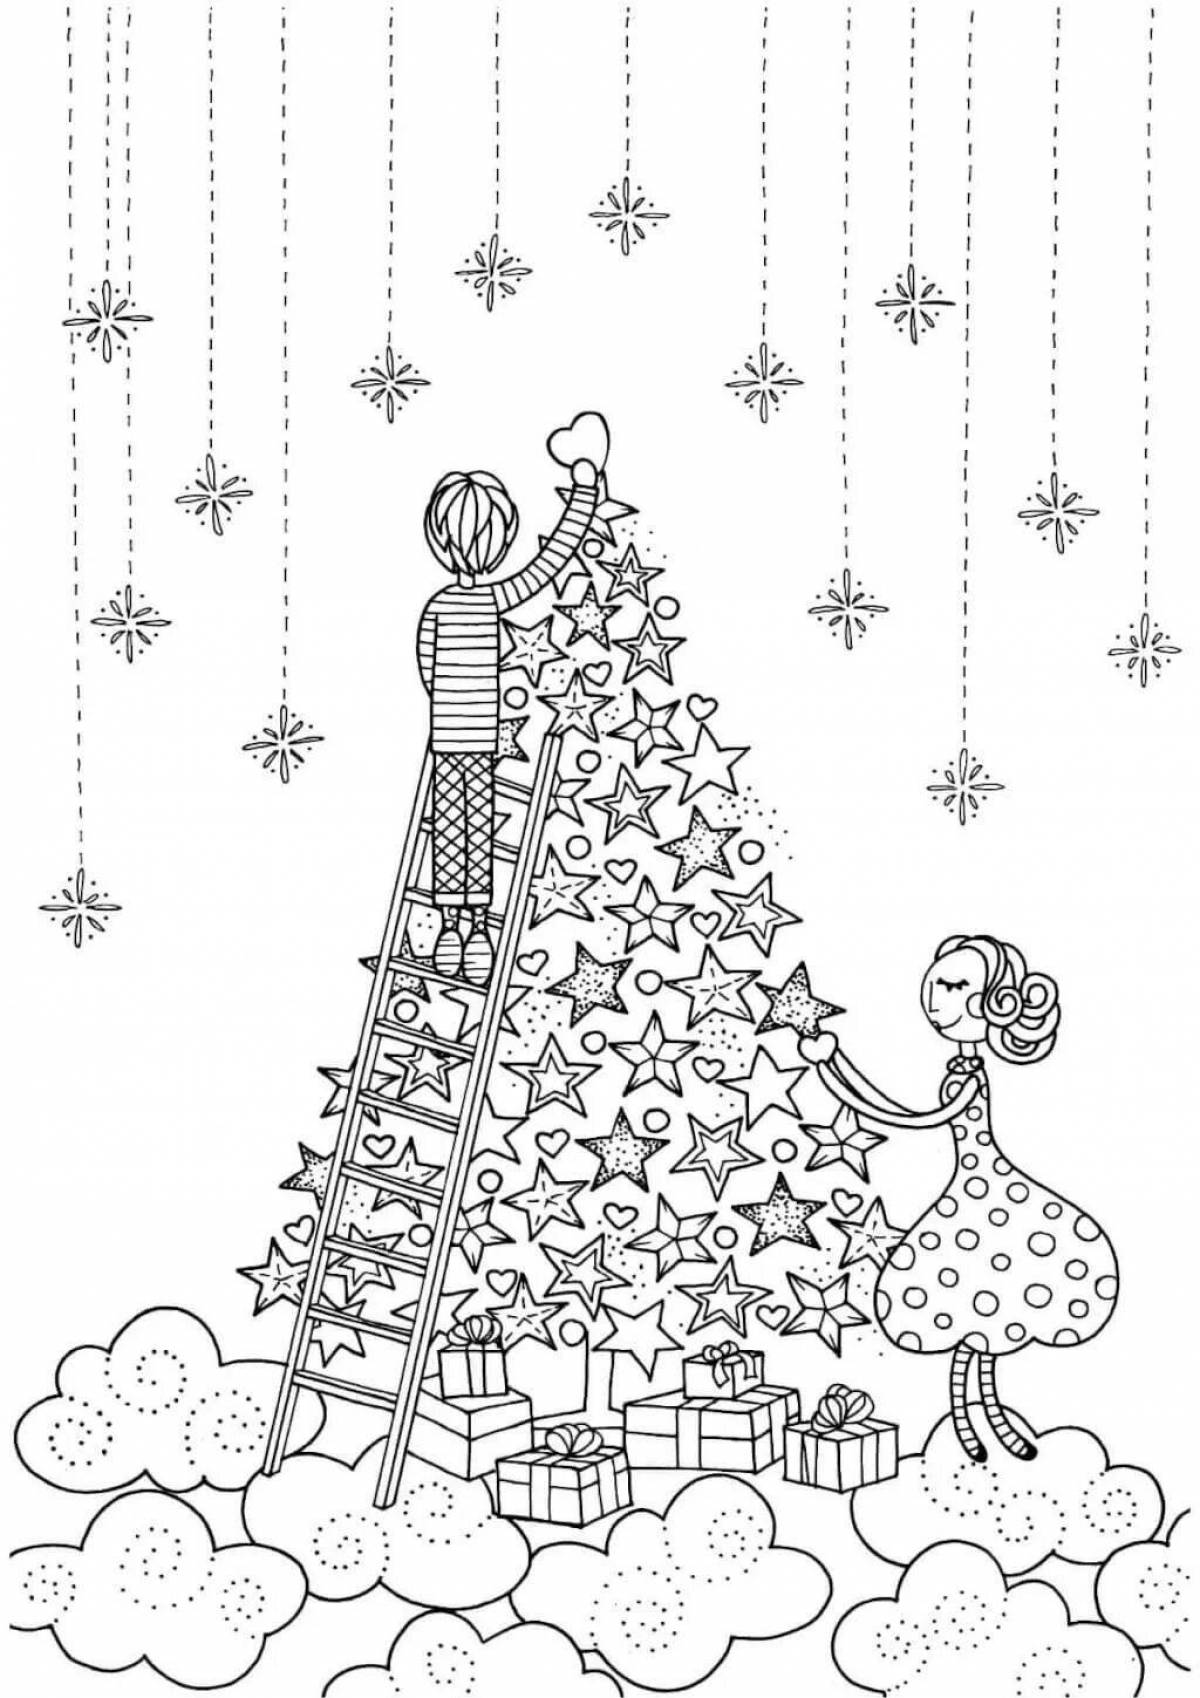 Glorious new year miracle coloring book